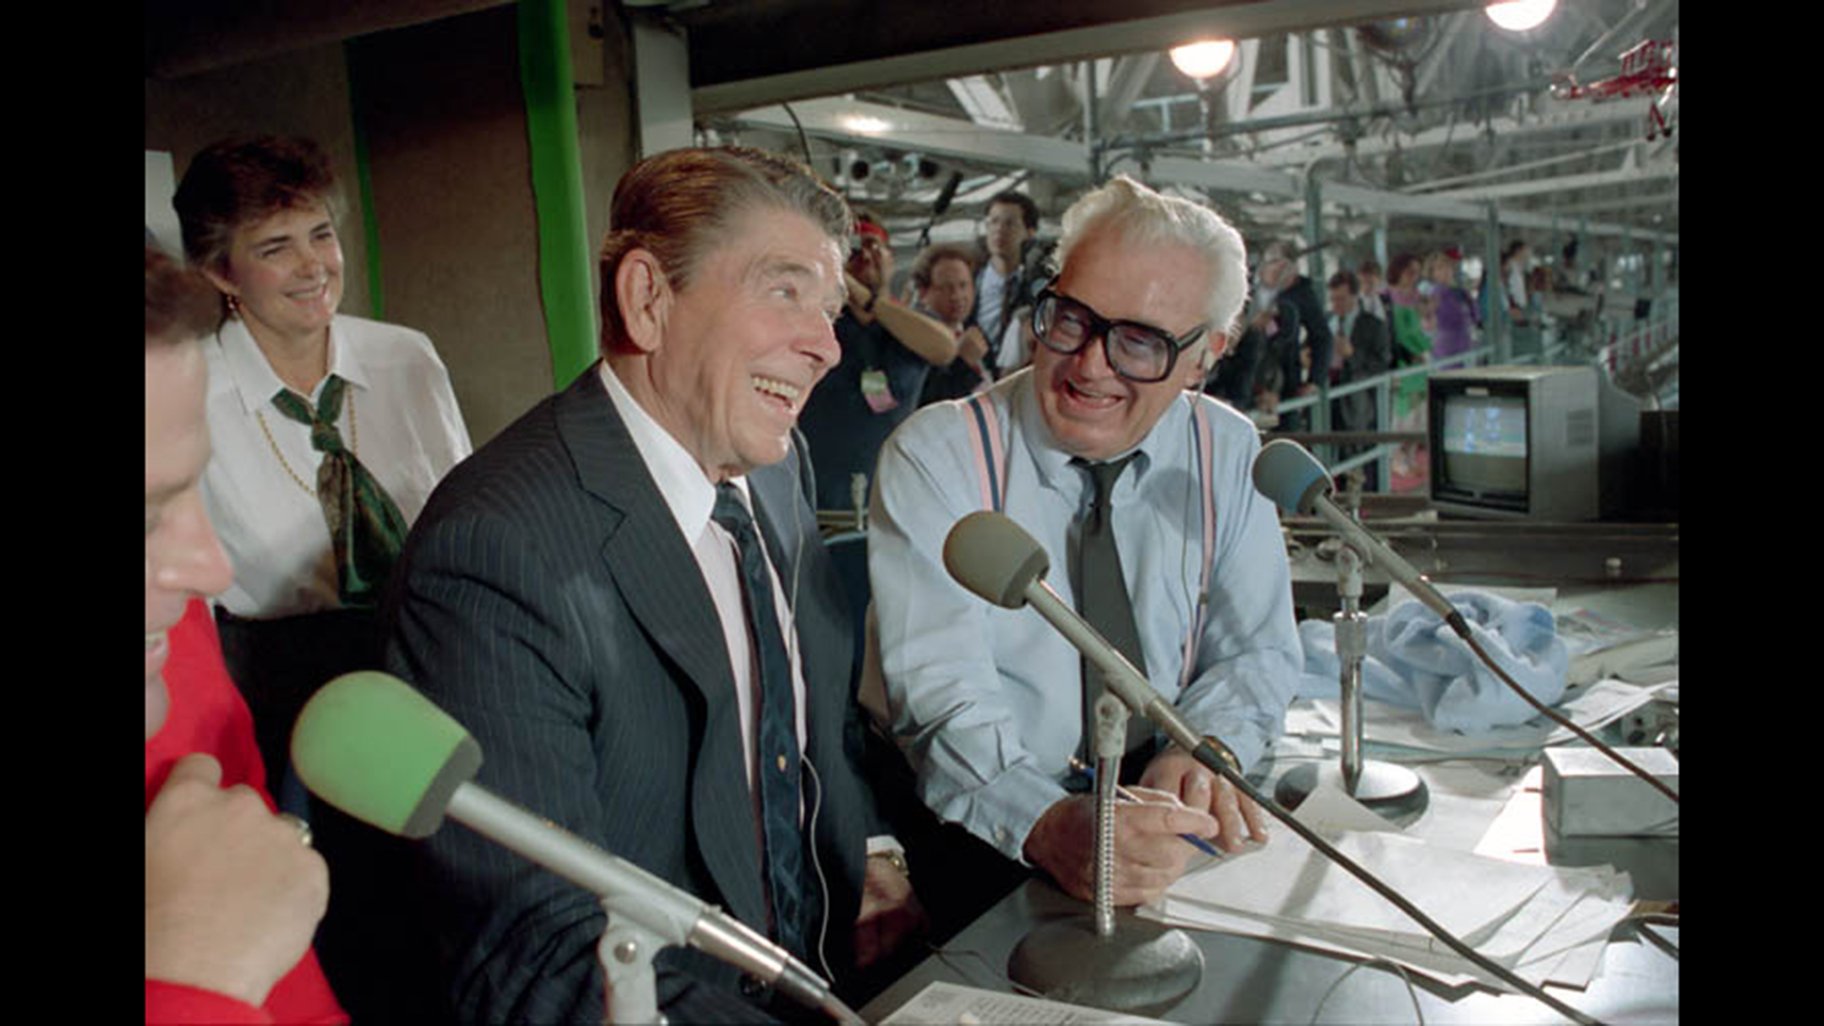 Harry Caray's legacy lives as Cubs seek title